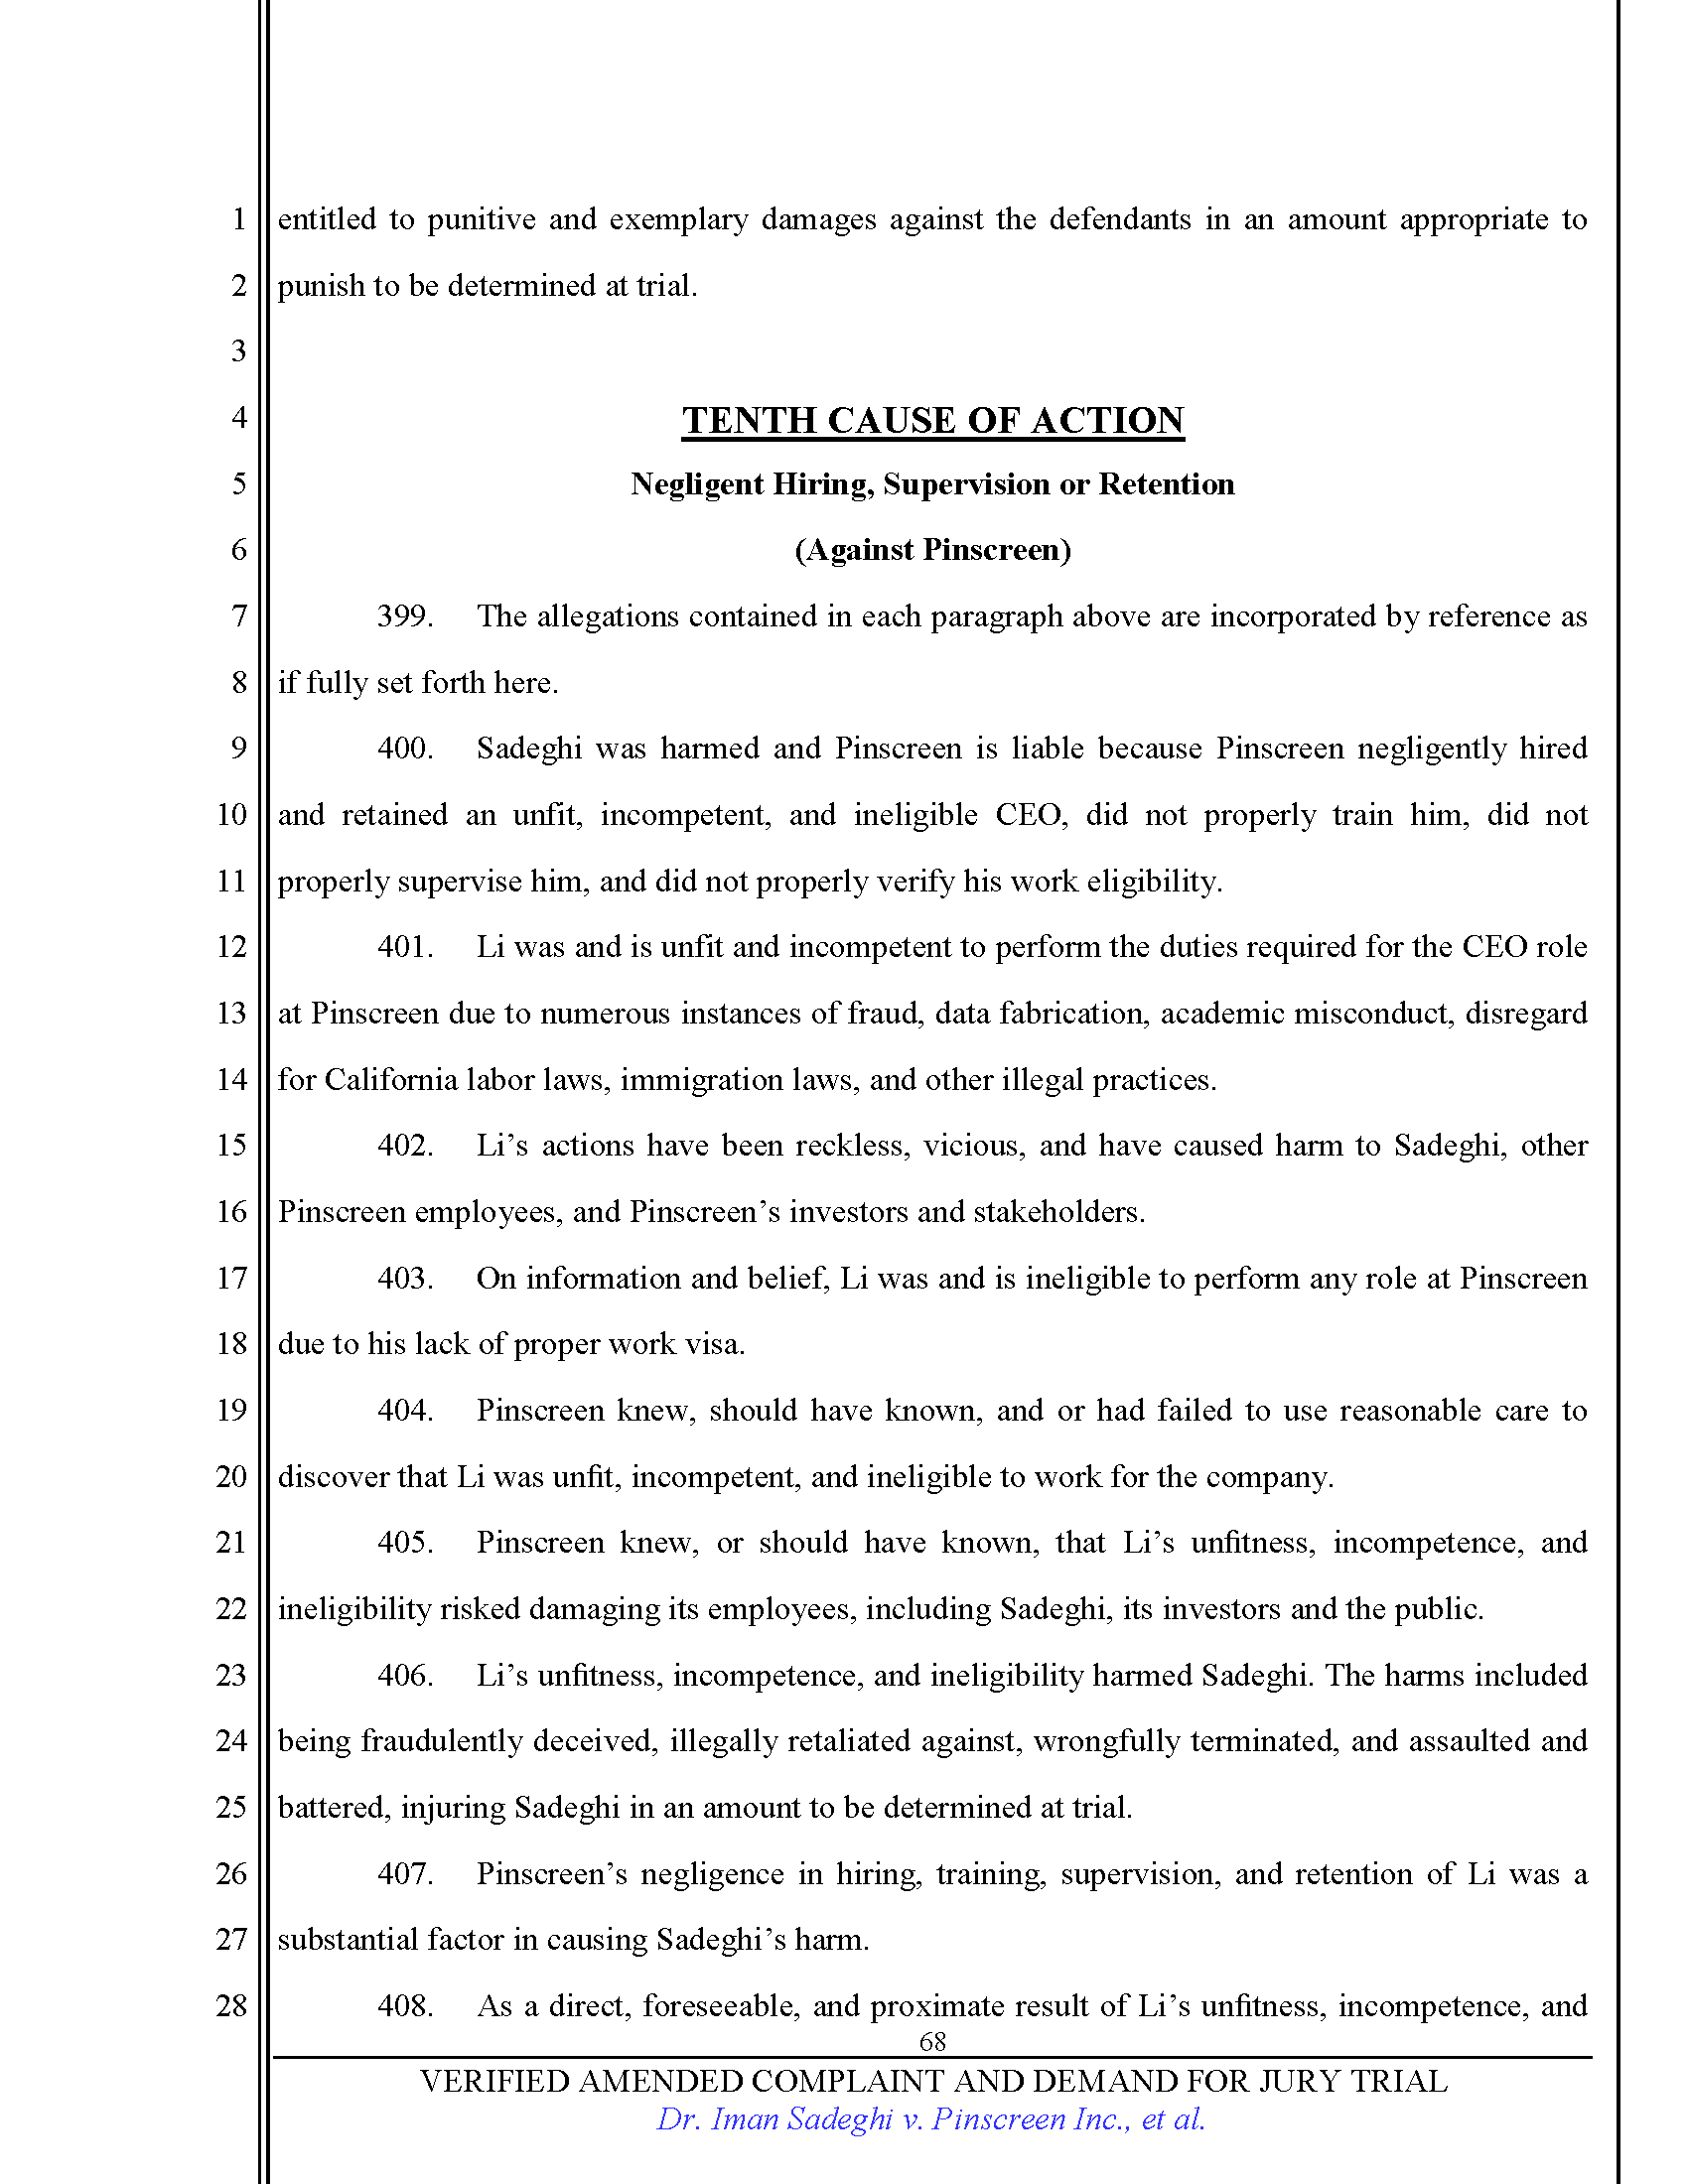 First Amended Complaint (FAC) Page 68